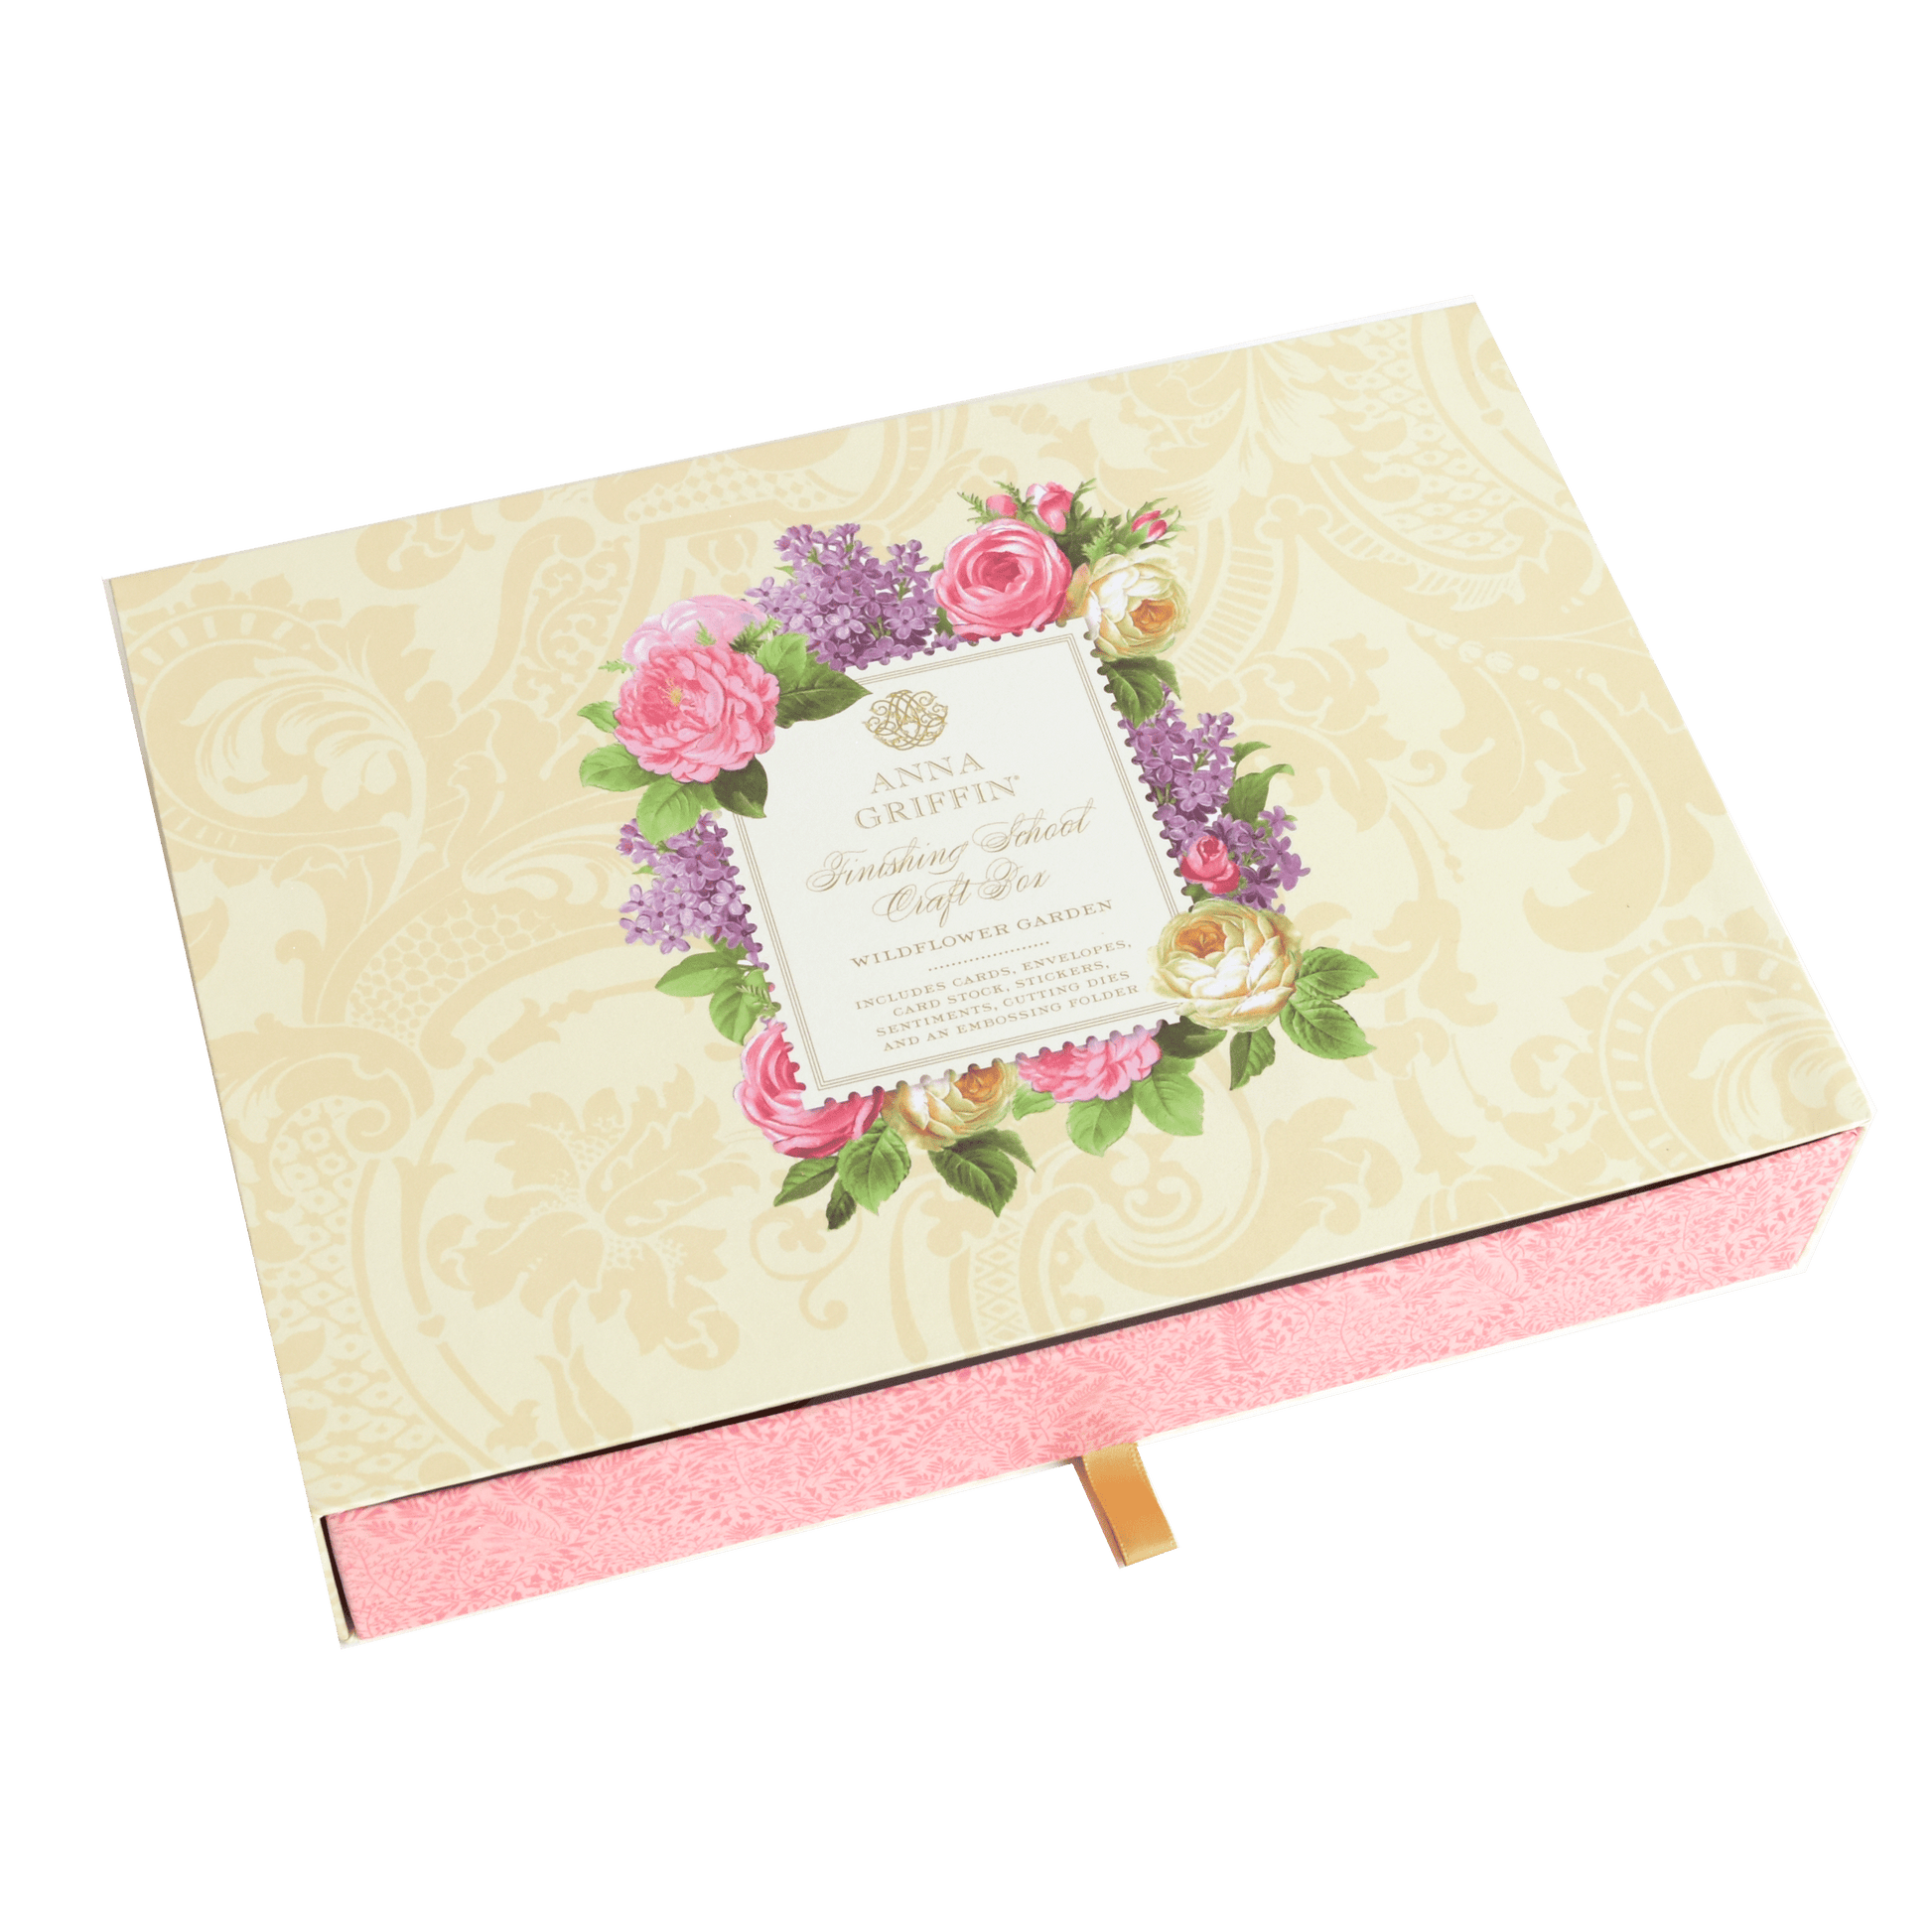 a wedding card box with flowers on it.